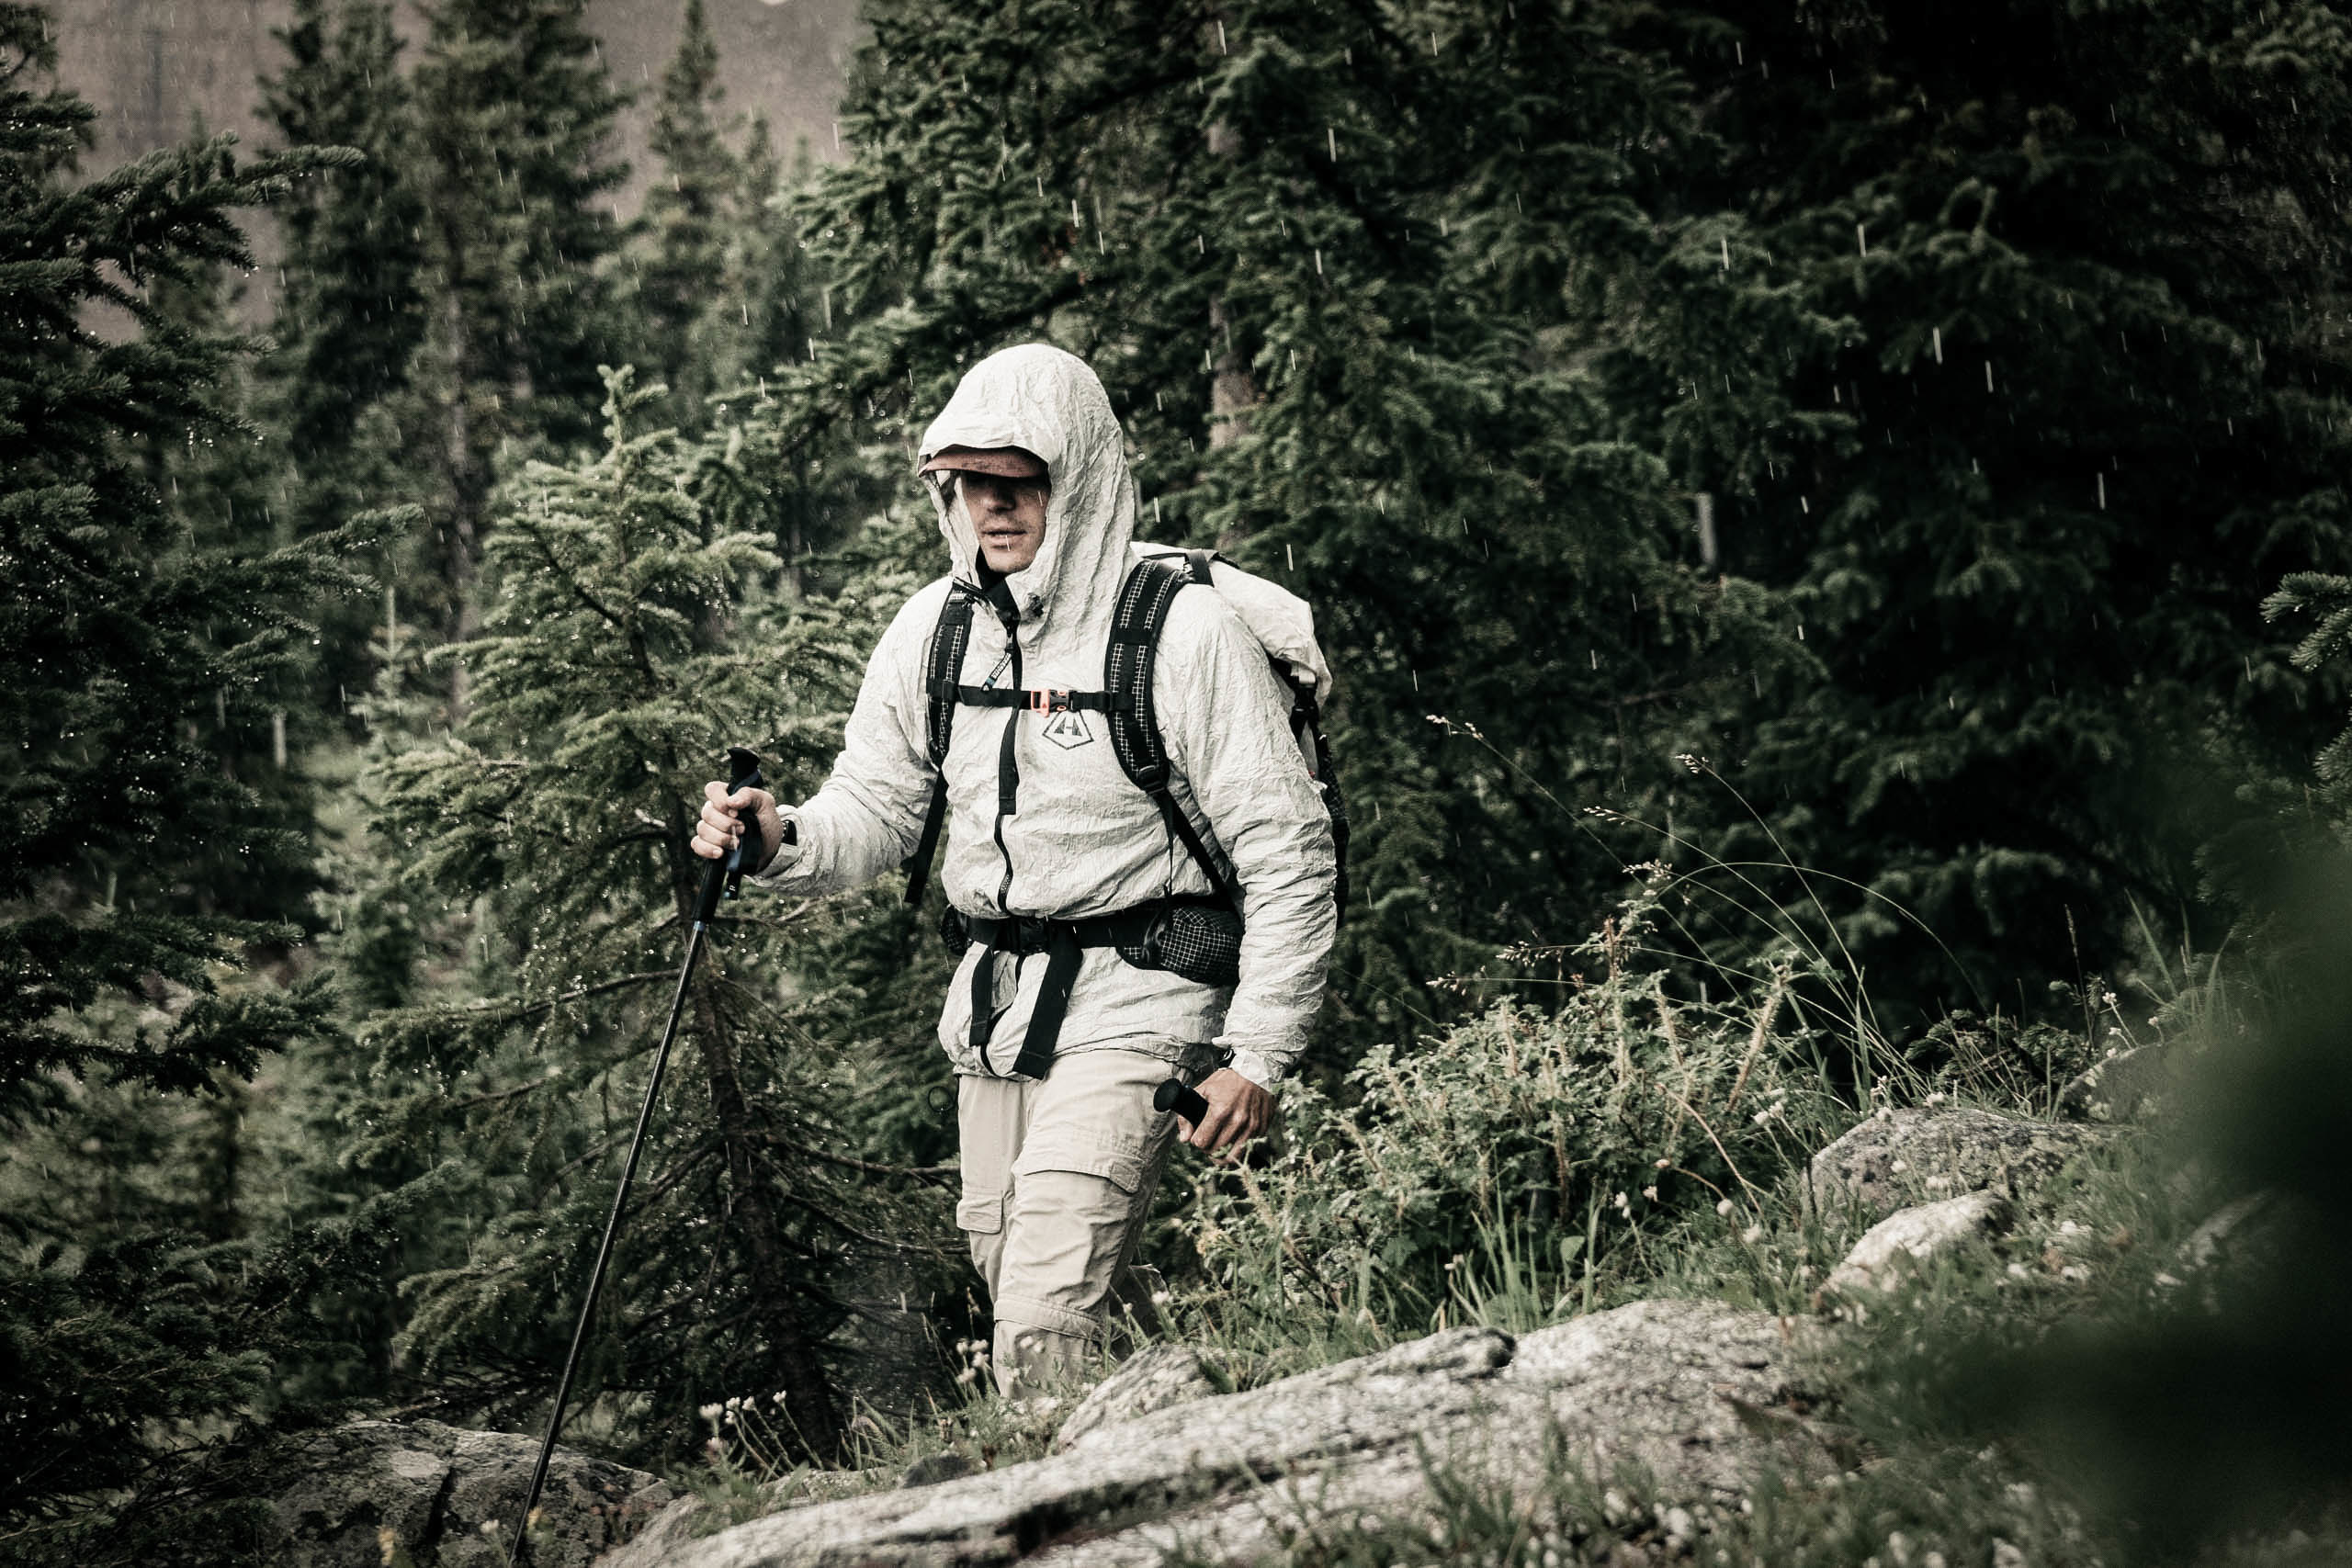 Hyperlite Mountain Gear Expands Ultralight Product Line Into Technical Apparel